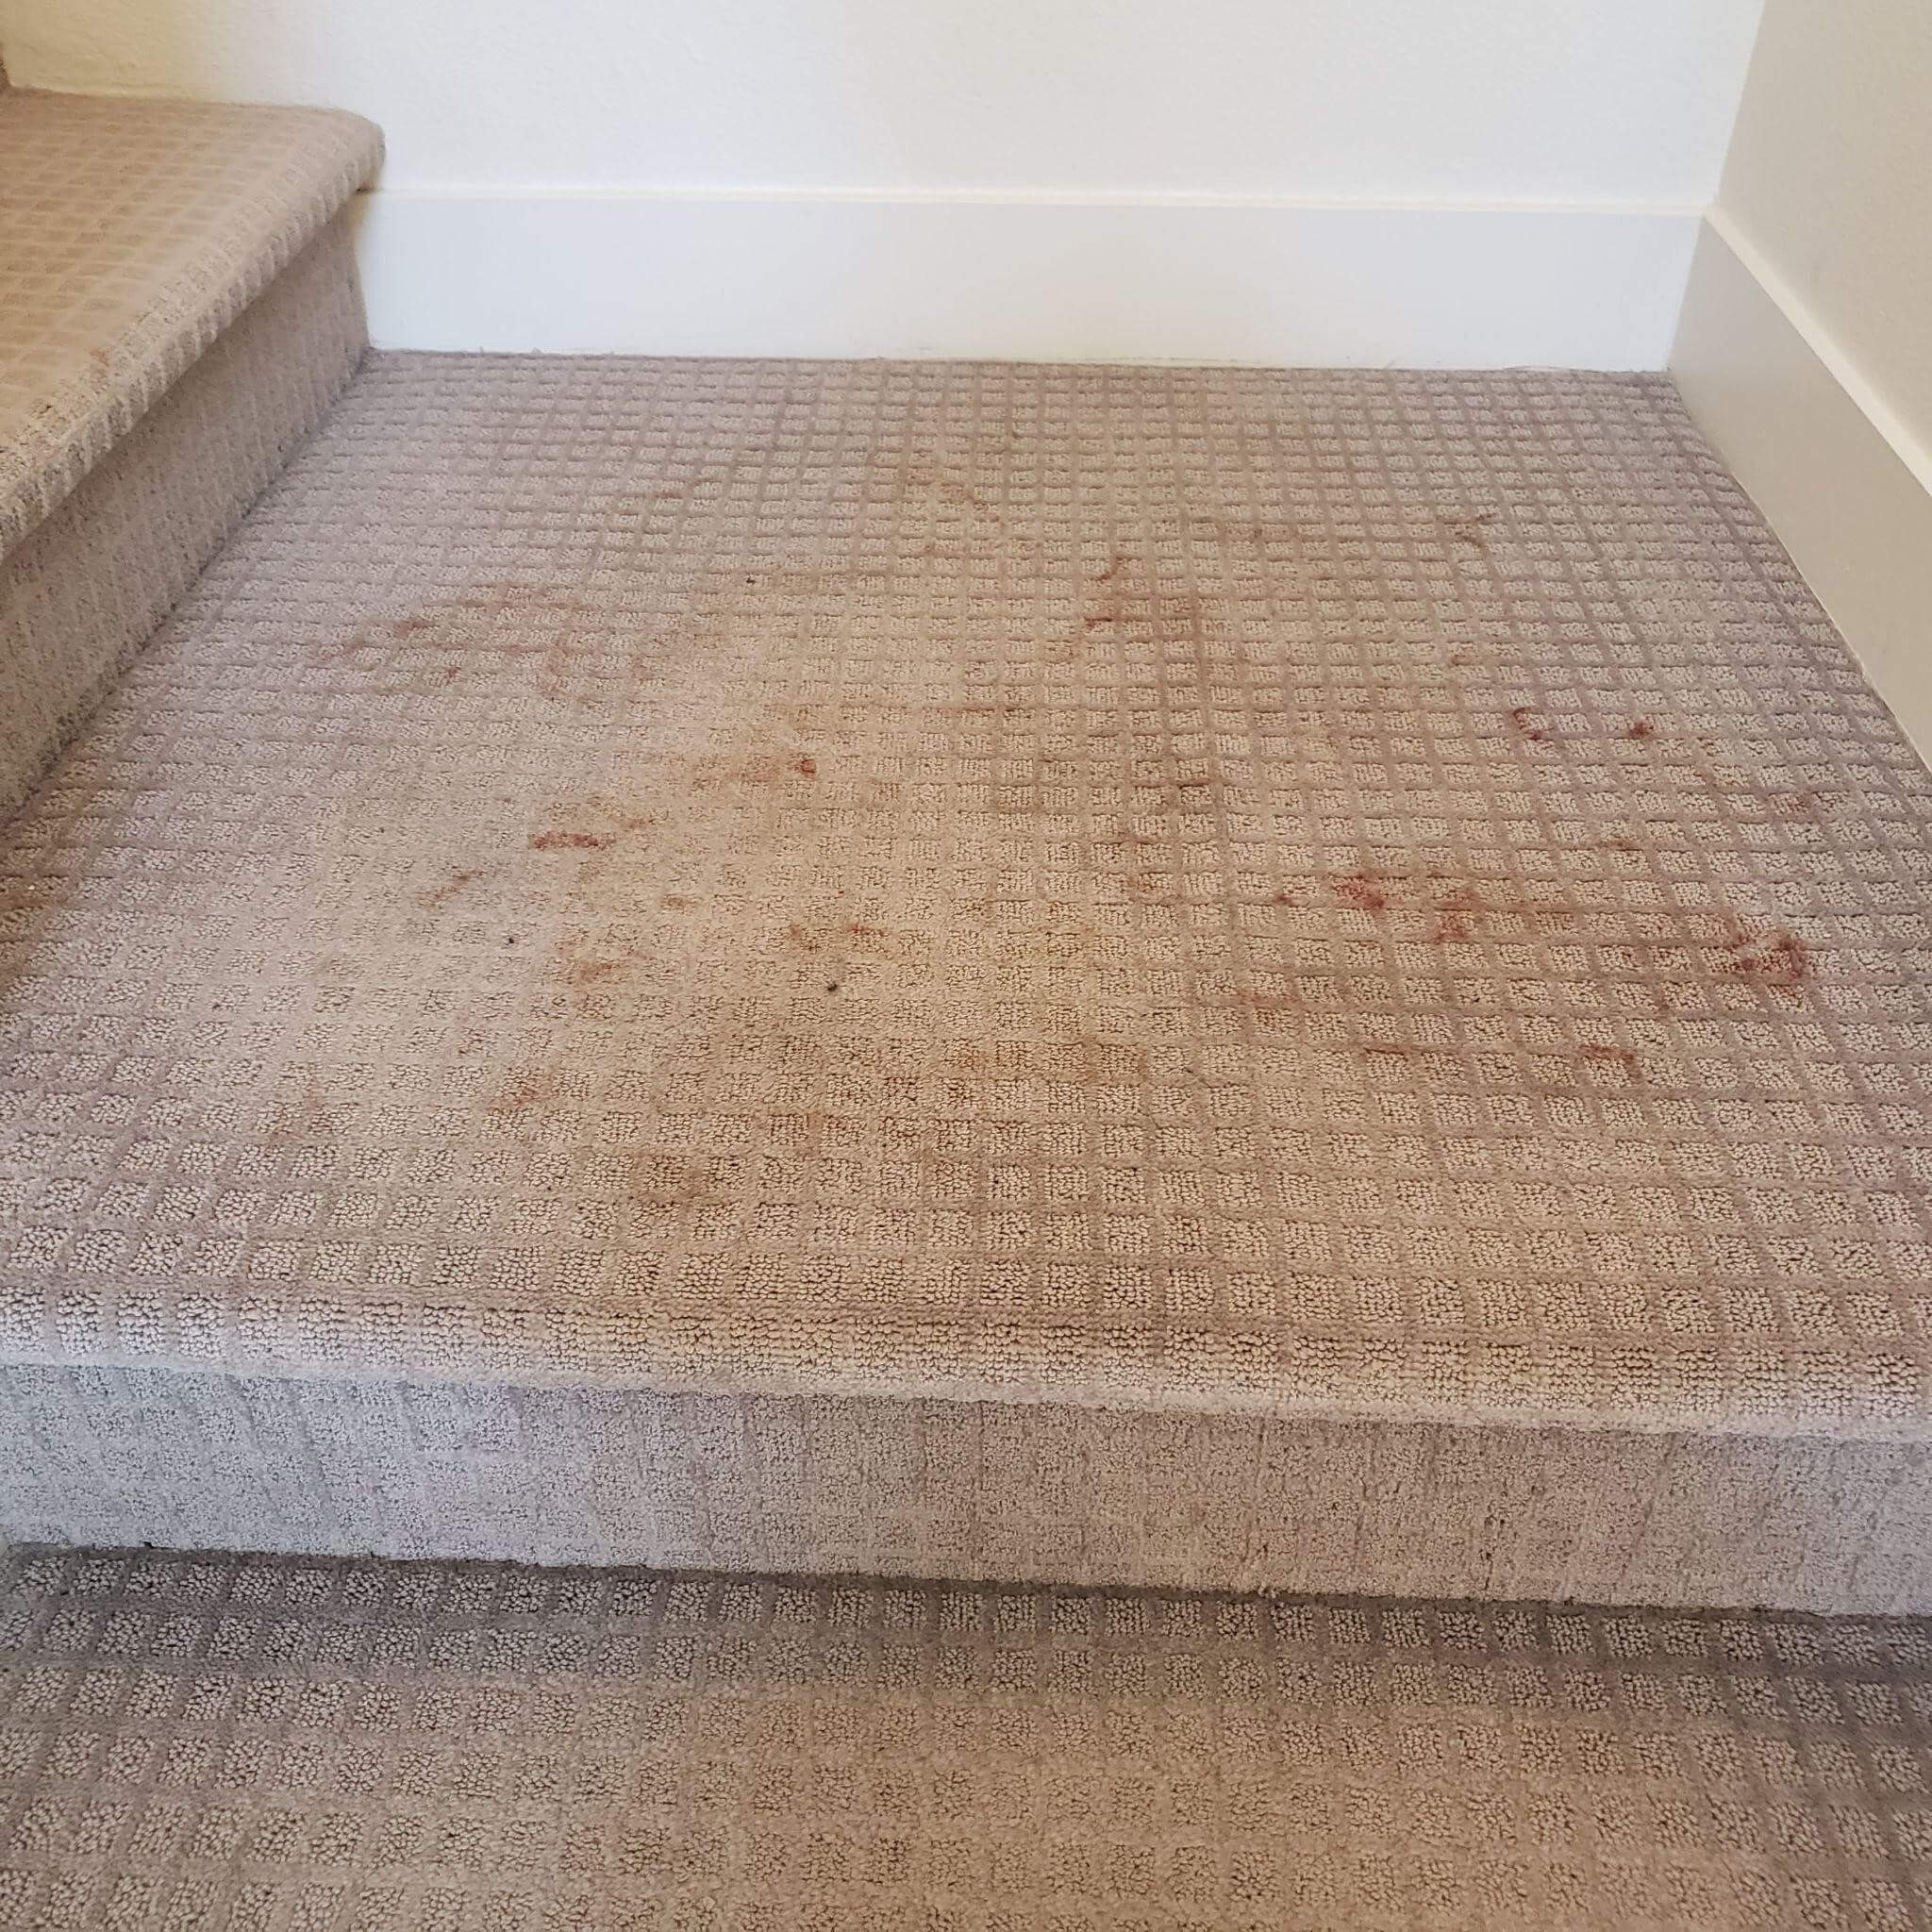 carpet cleaning before and after photos